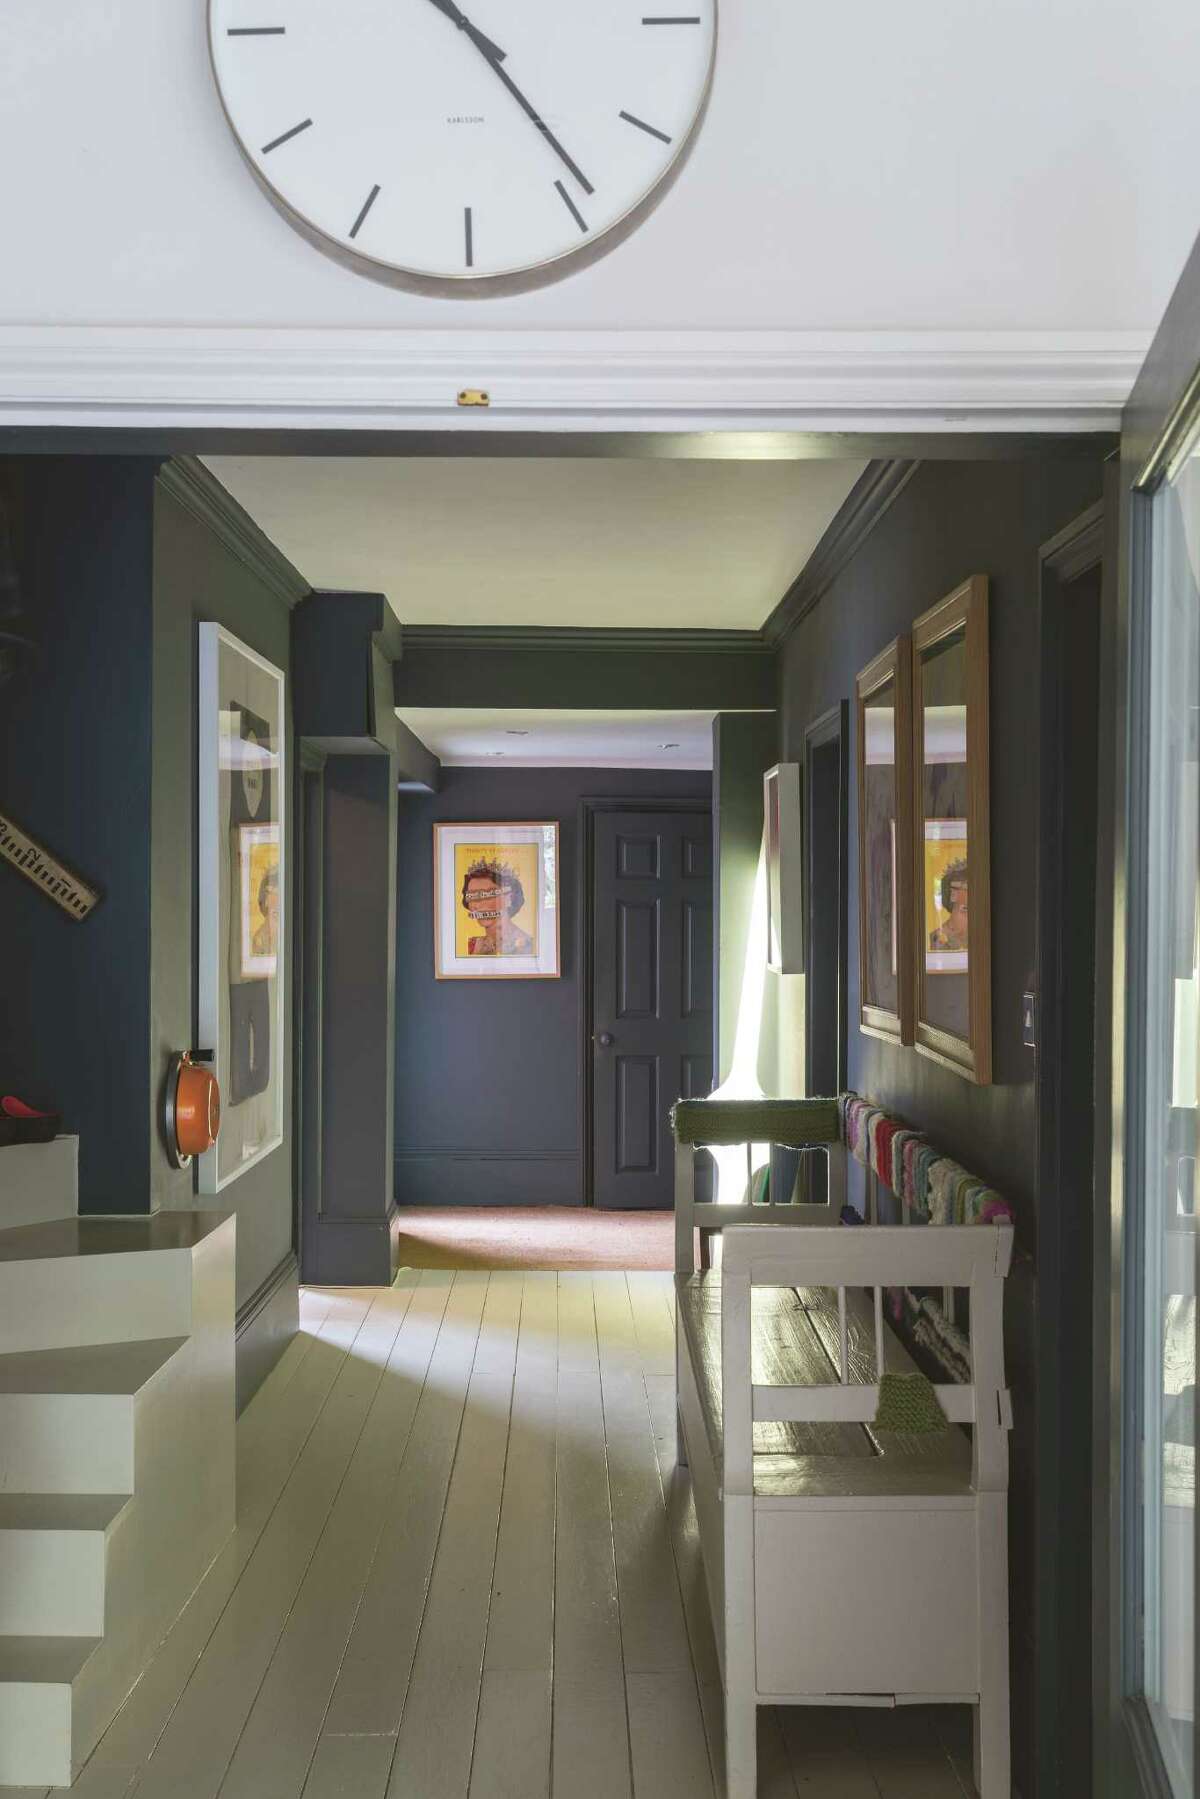 The hallway in Joa Studholme's home has dark gray walls﻿. Its white floors reflect light onto the walls to brighten what otherwise could be a too-dark space.﻿